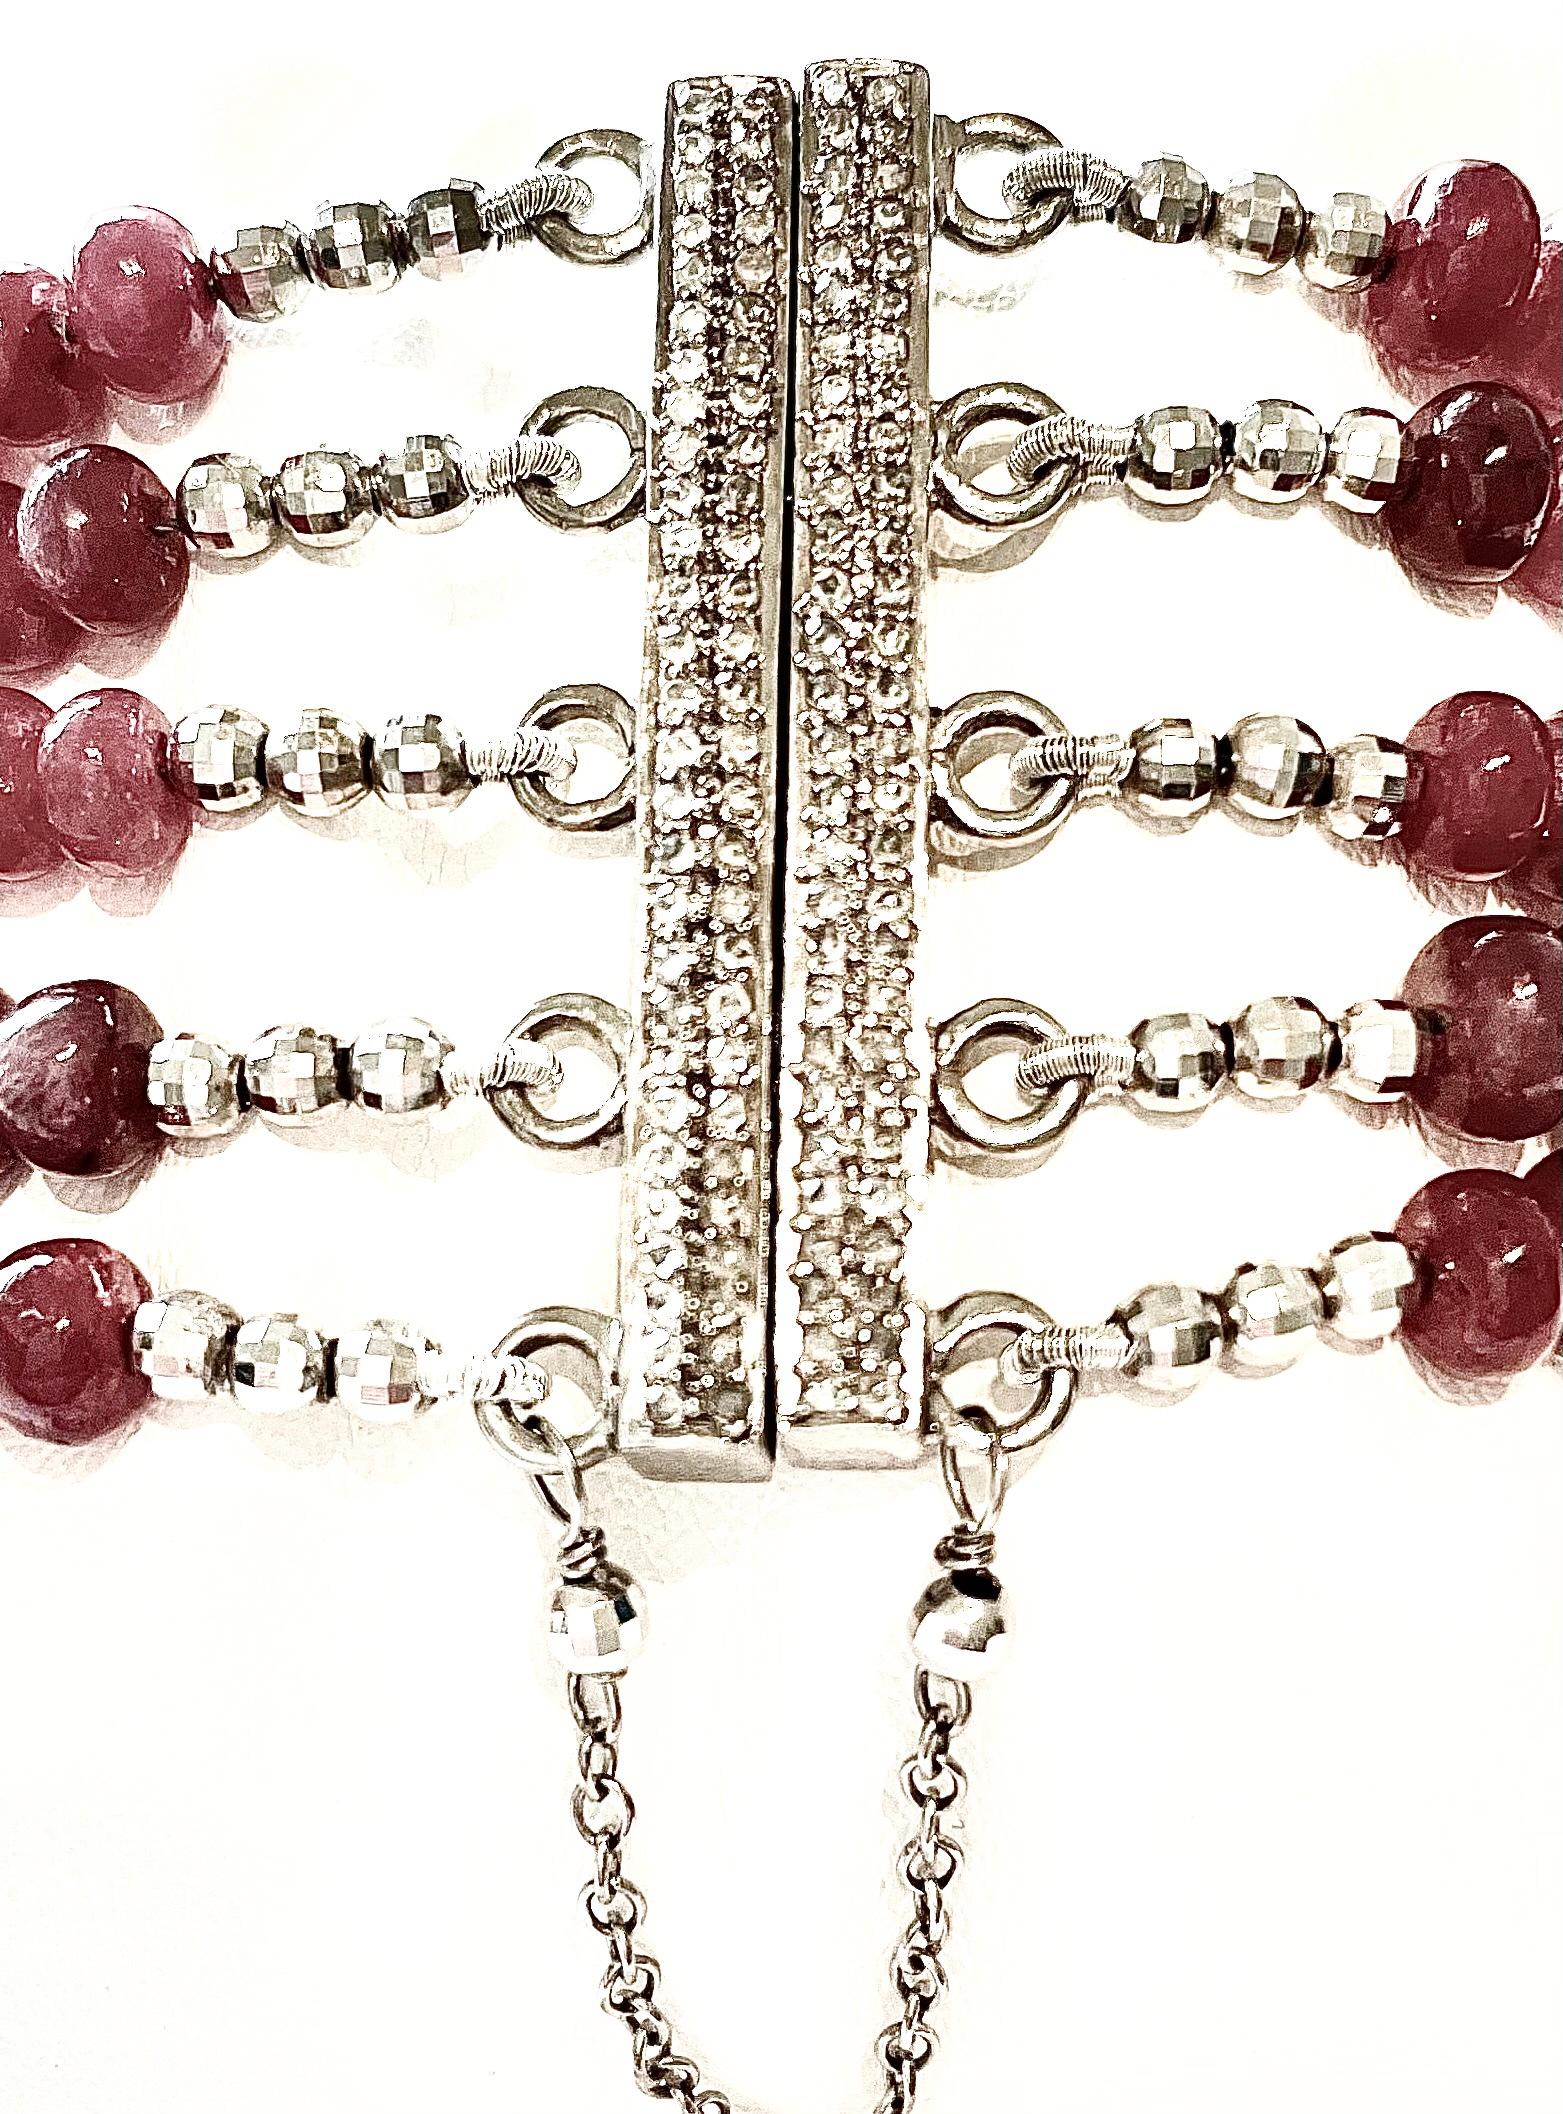 Description
Rubies 352 carats, pave diamond centerpiece. Unique, strong magnetic pave diamond clasp for ease of use, secured with a safety chain, 5 strand bracelet.                    
Item # B1213
Check out matching necklace and ring, see last